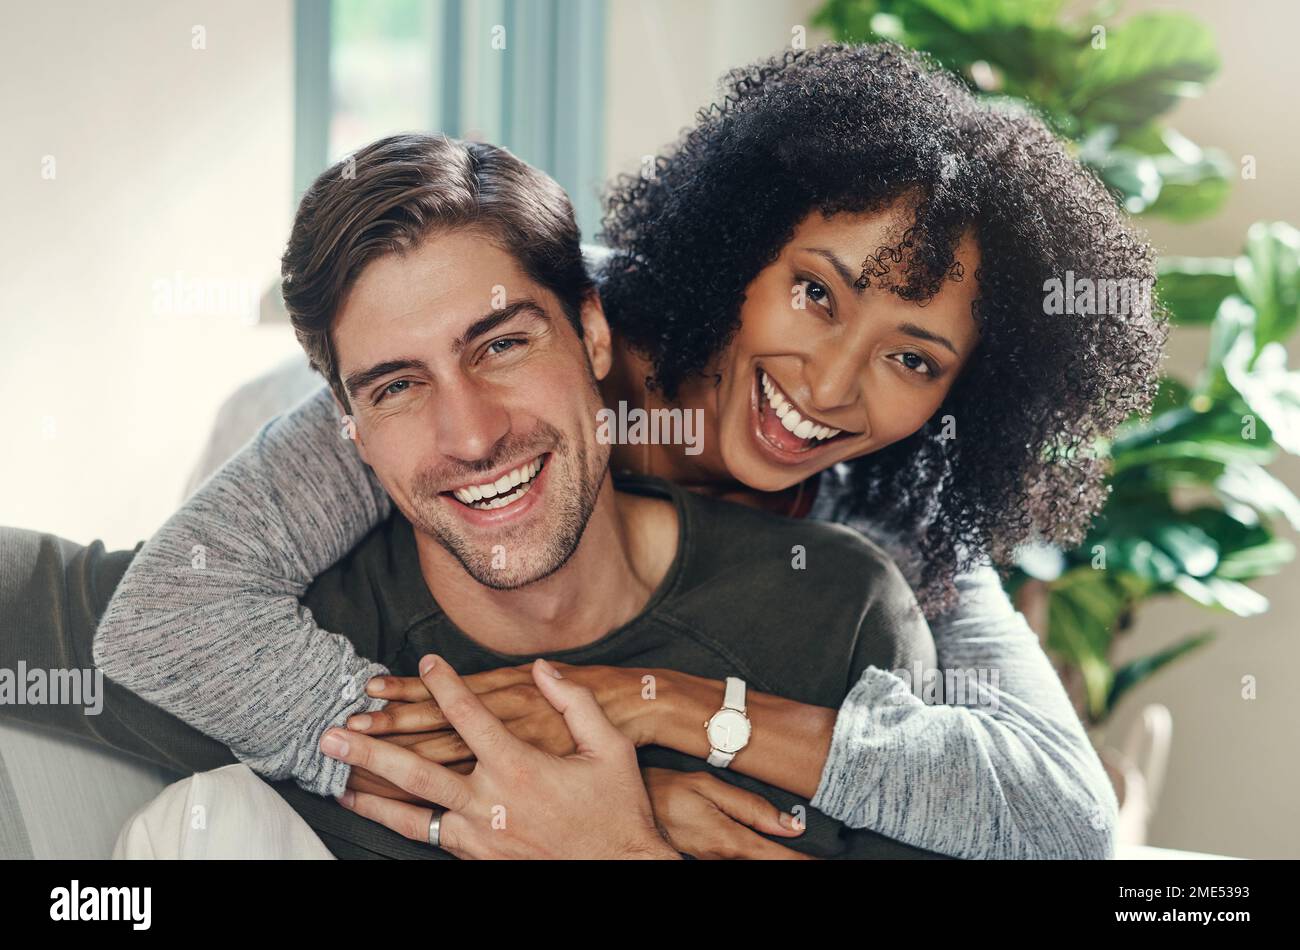 We bring love and happiness into each others lives. Portrait of an affectionate young couple spending some quality time together in their living room Stock Photo